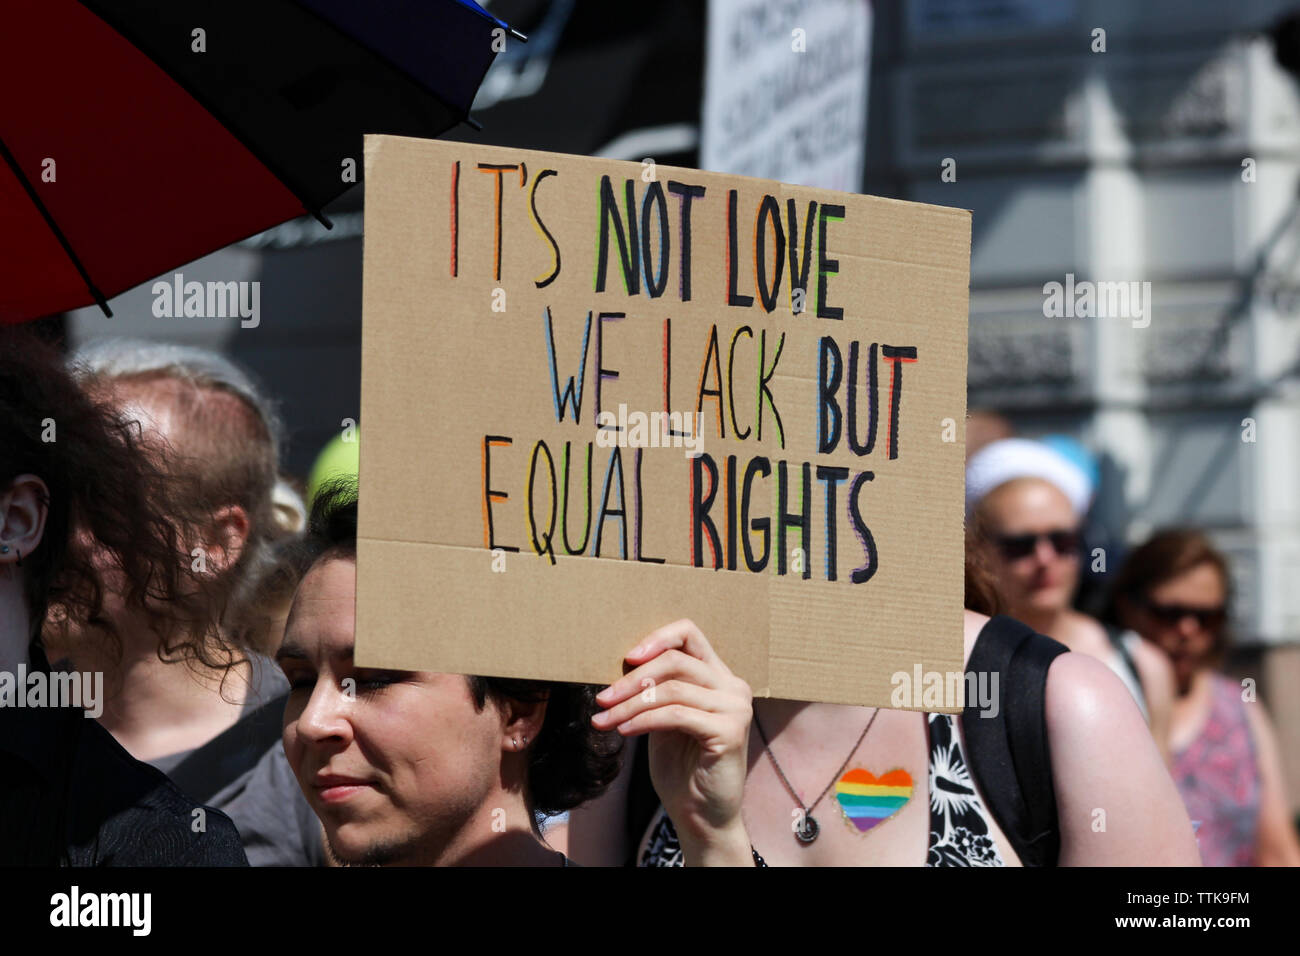 It's not love we lack but equal rights sign at Helsinki Pride Parade 2016 in Helsinki, Finland Stock Photo